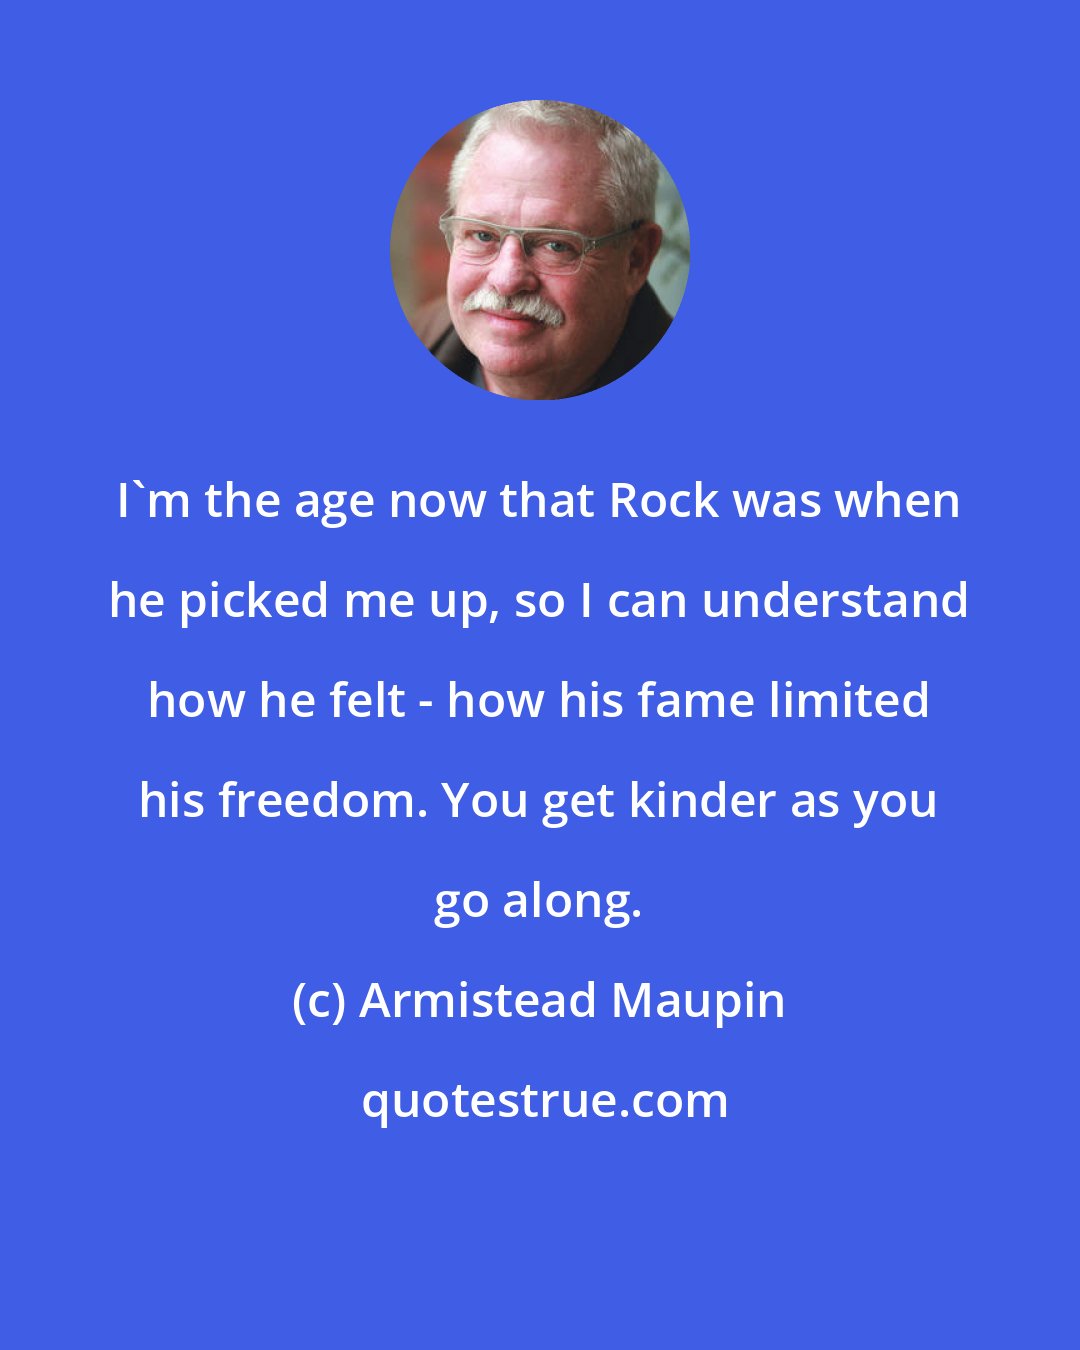 Armistead Maupin: I'm the age now that Rock was when he picked me up, so I can understand how he felt - how his fame limited his freedom. You get kinder as you go along.